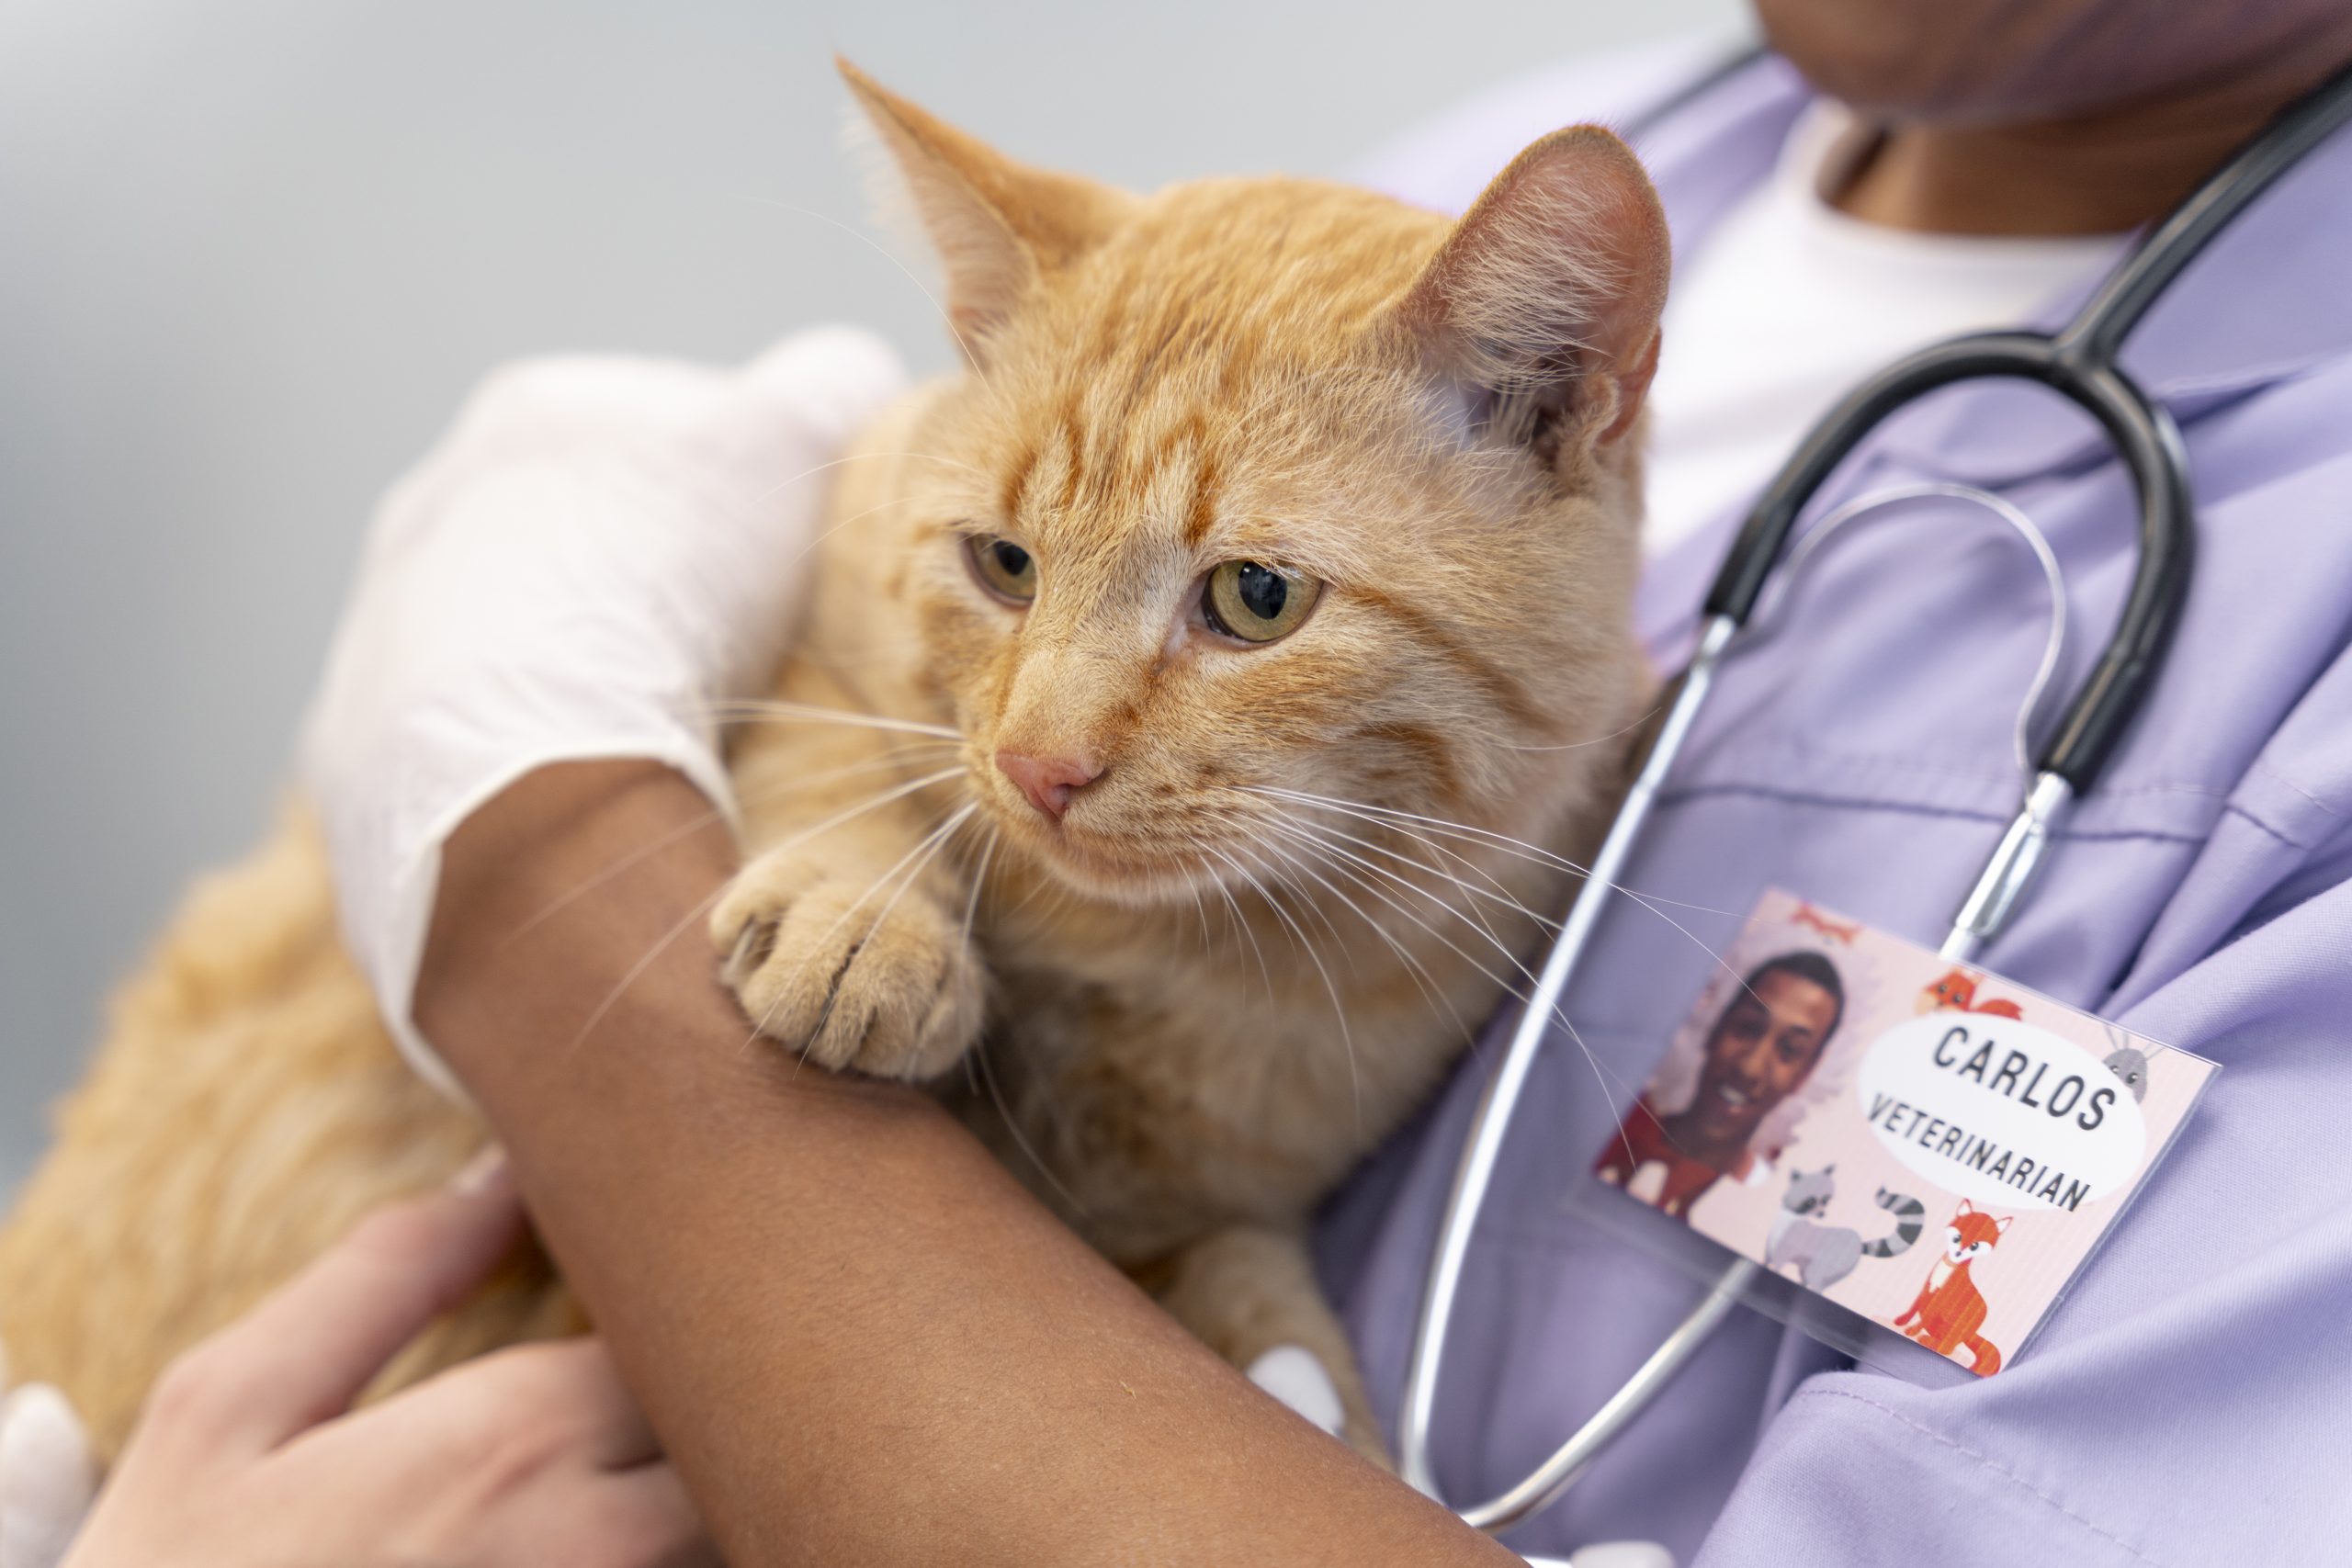 FIV targets a cat's white blood cells and their ability to fight off infection.